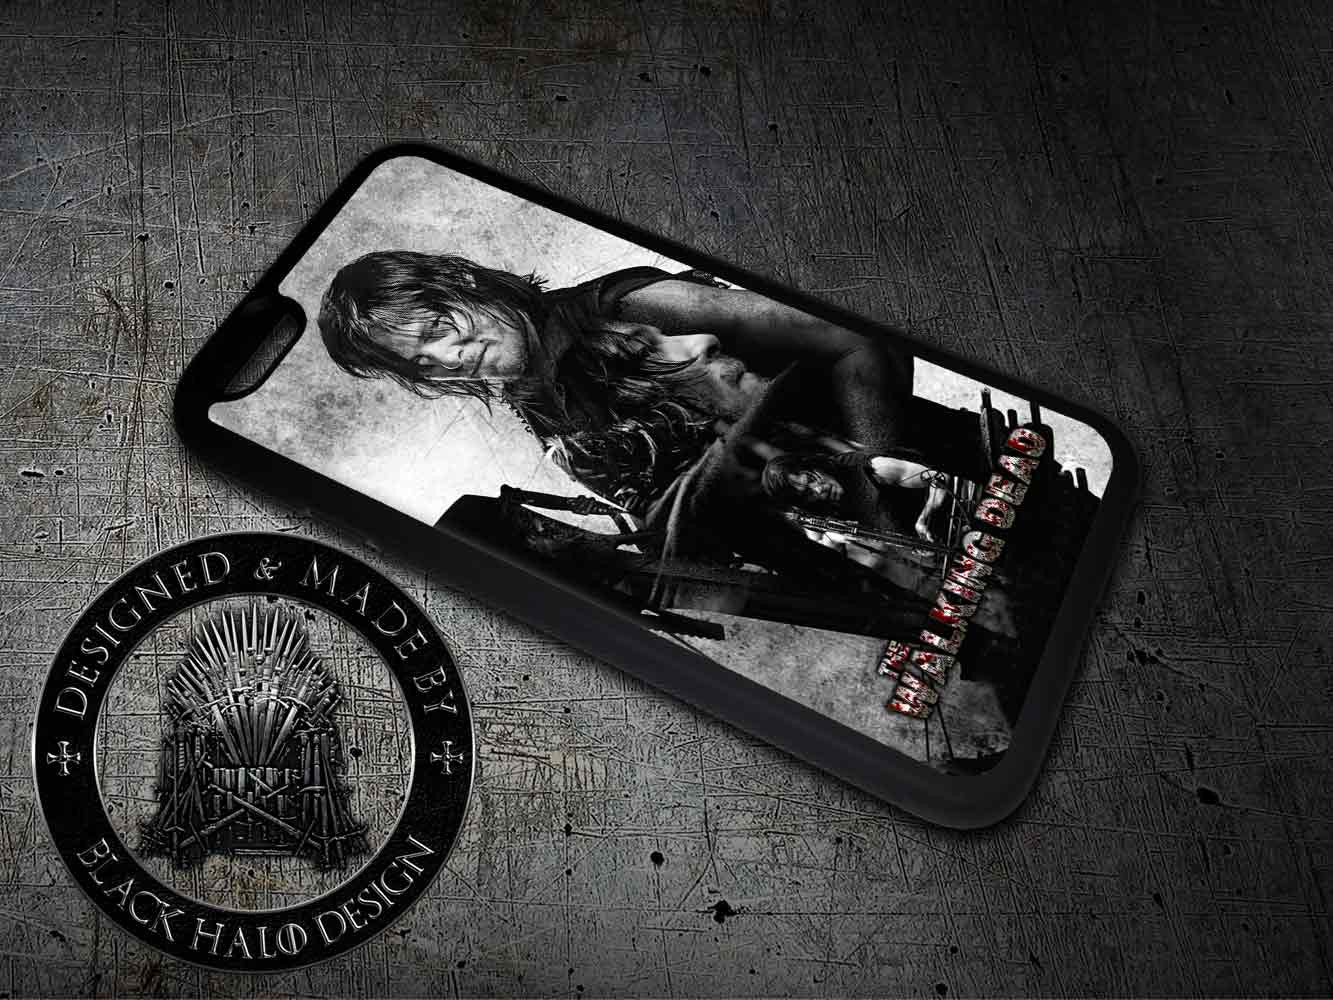 The Walking Dead: Daryl Dixon Case/Cover for choice of Apple iPhone 4-7 Plus